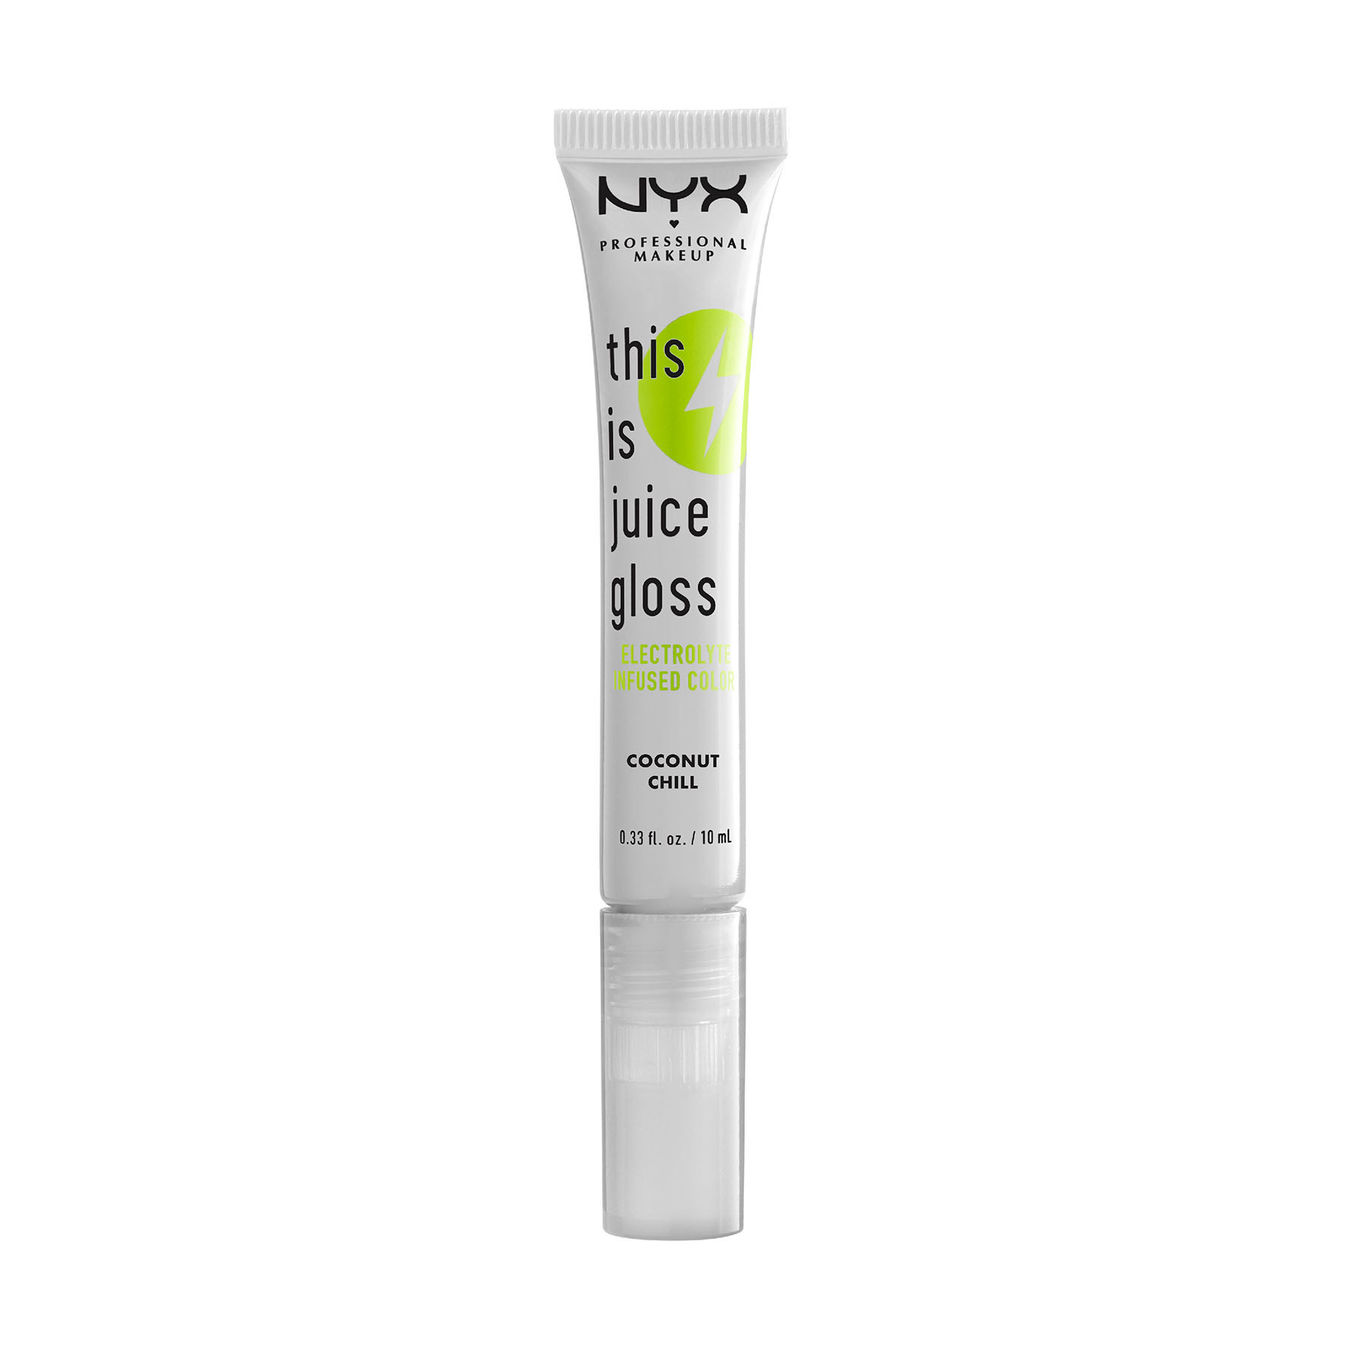 NYX Professional Makeup THIS IS JUICE GLOSS Lipgloss 1ST von NYX Professional Makeup